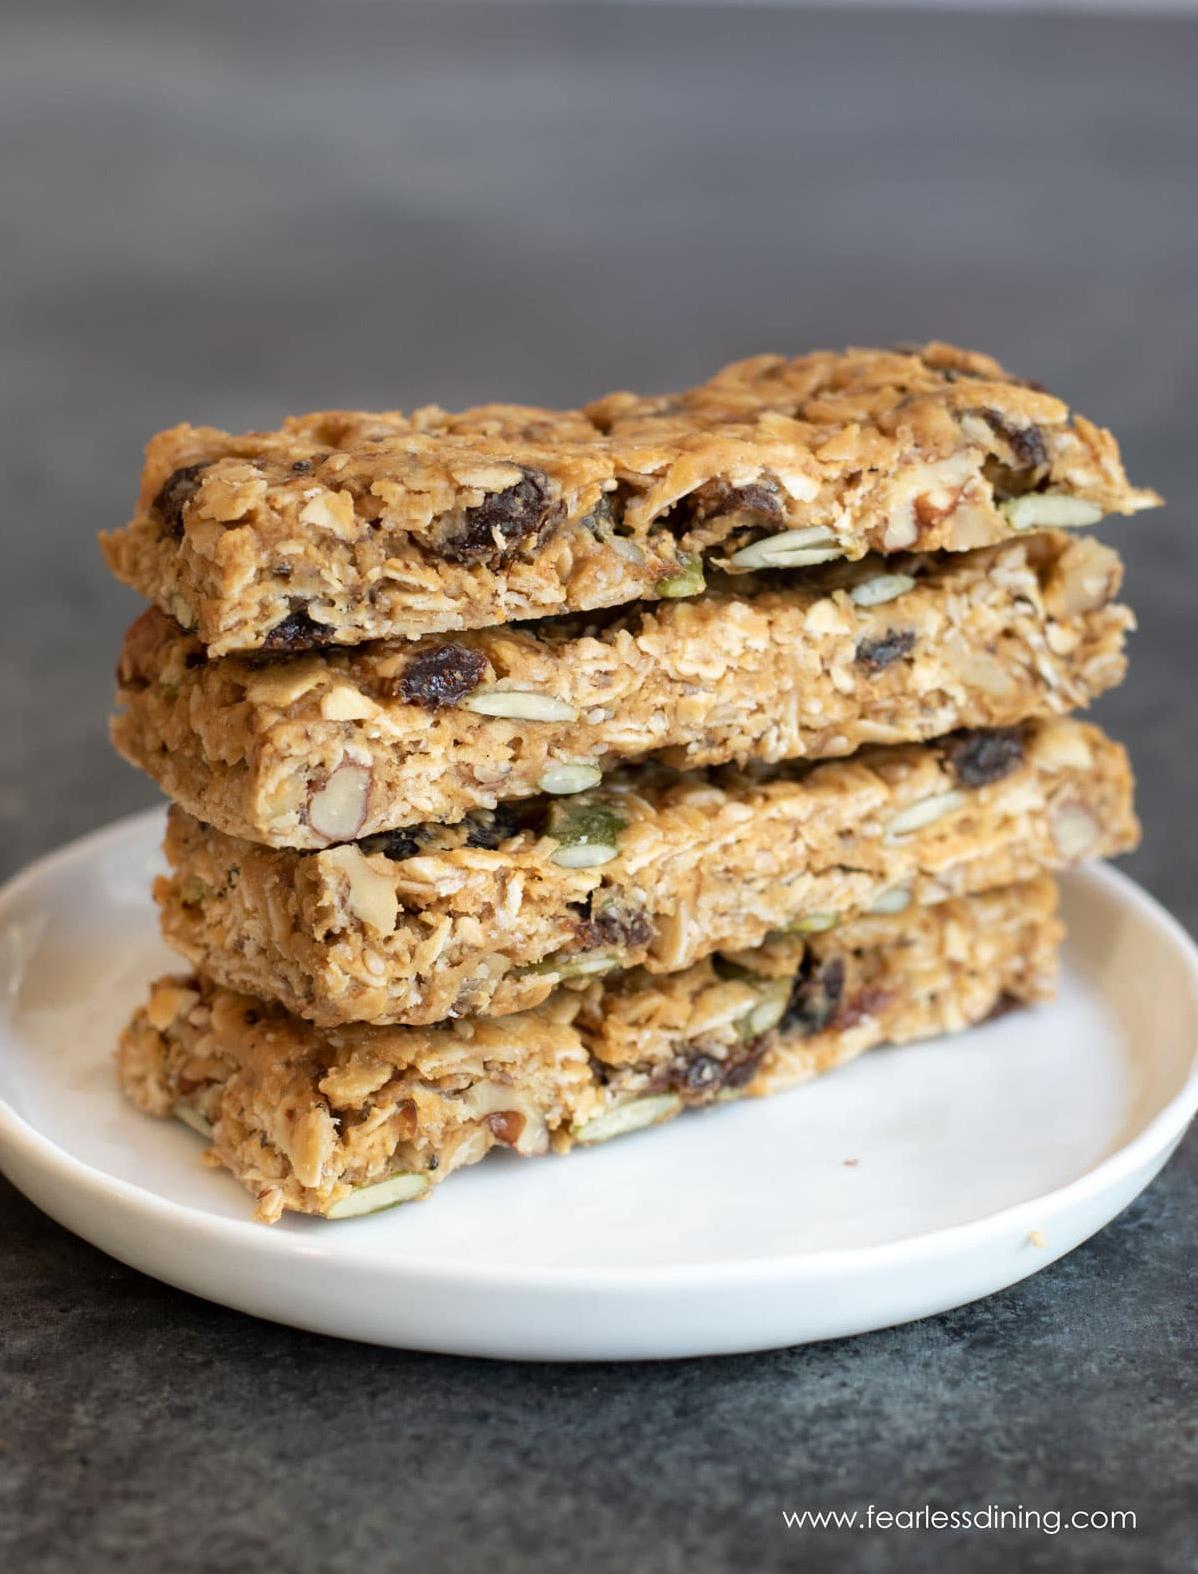  Fuel up with these gluten-free granola bars.